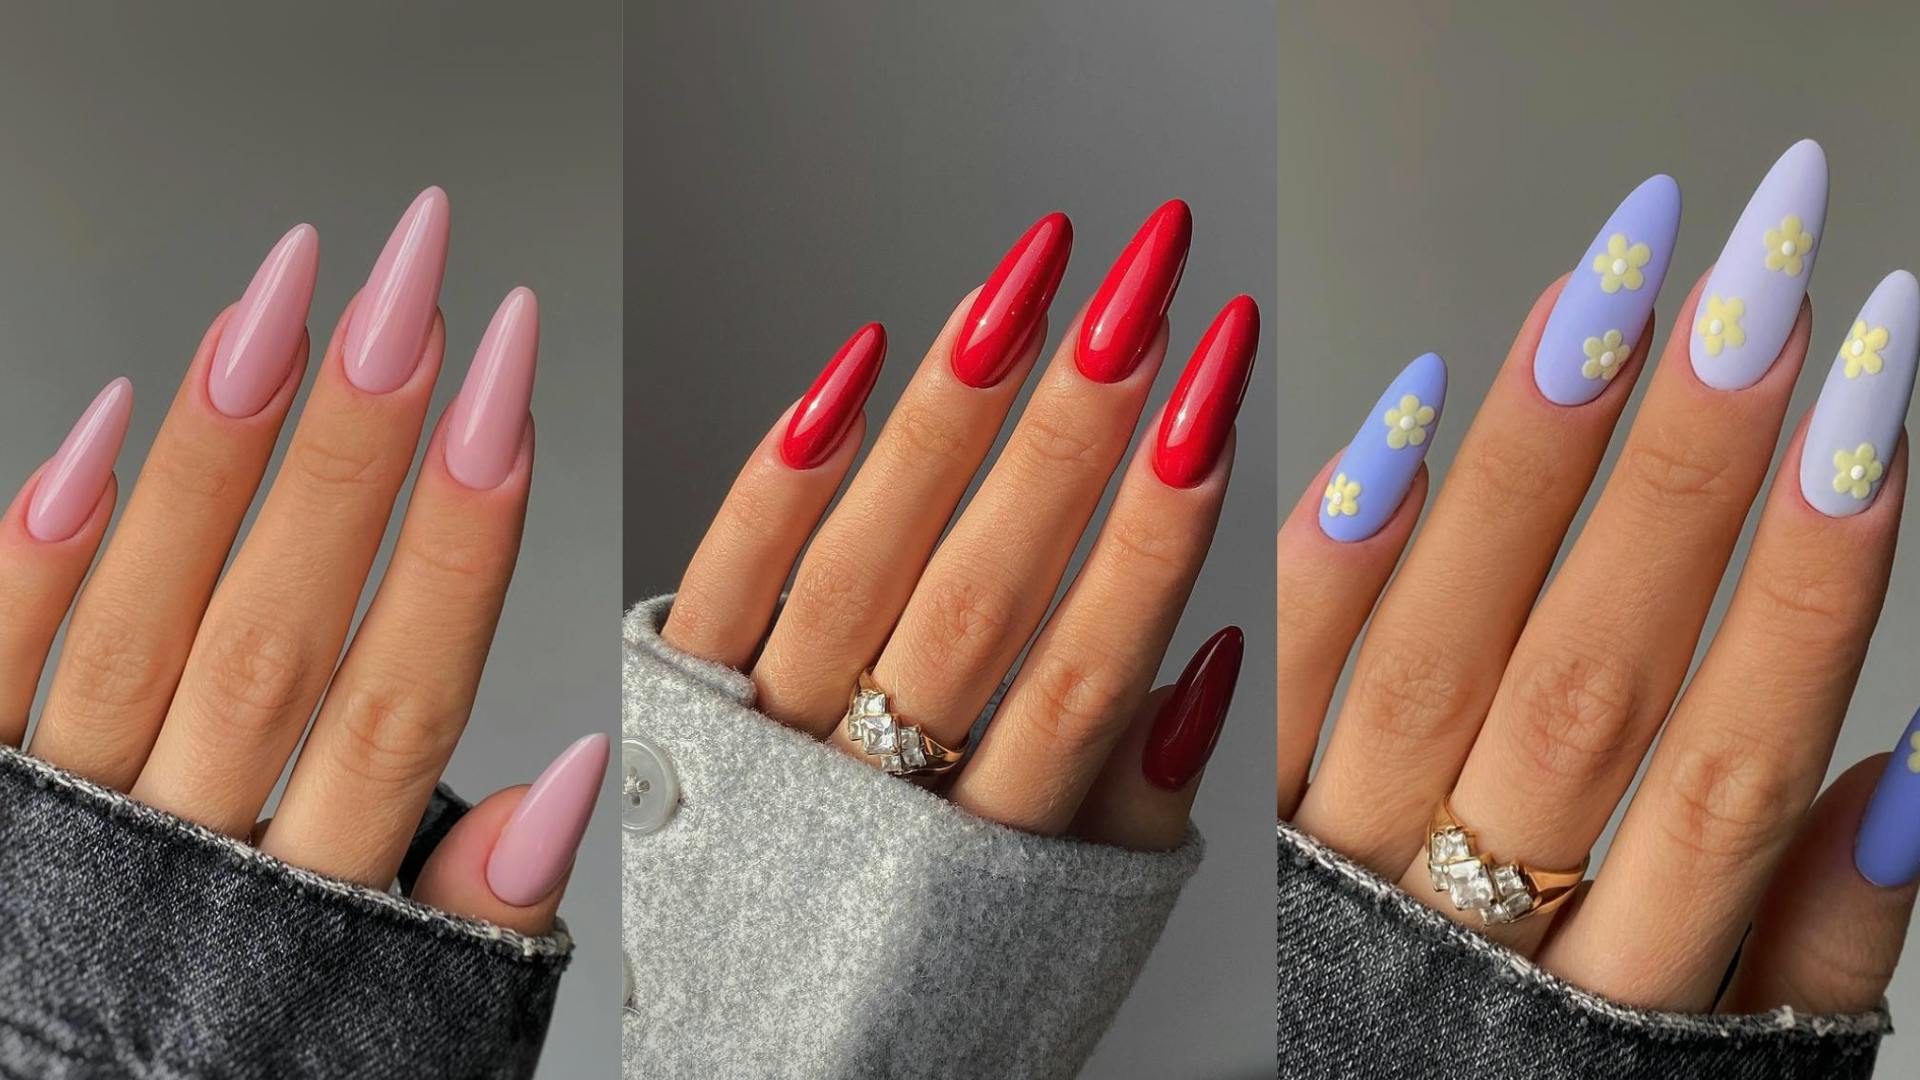 These Acrylic Nail Ideas Will Inspire Your Next Manicure